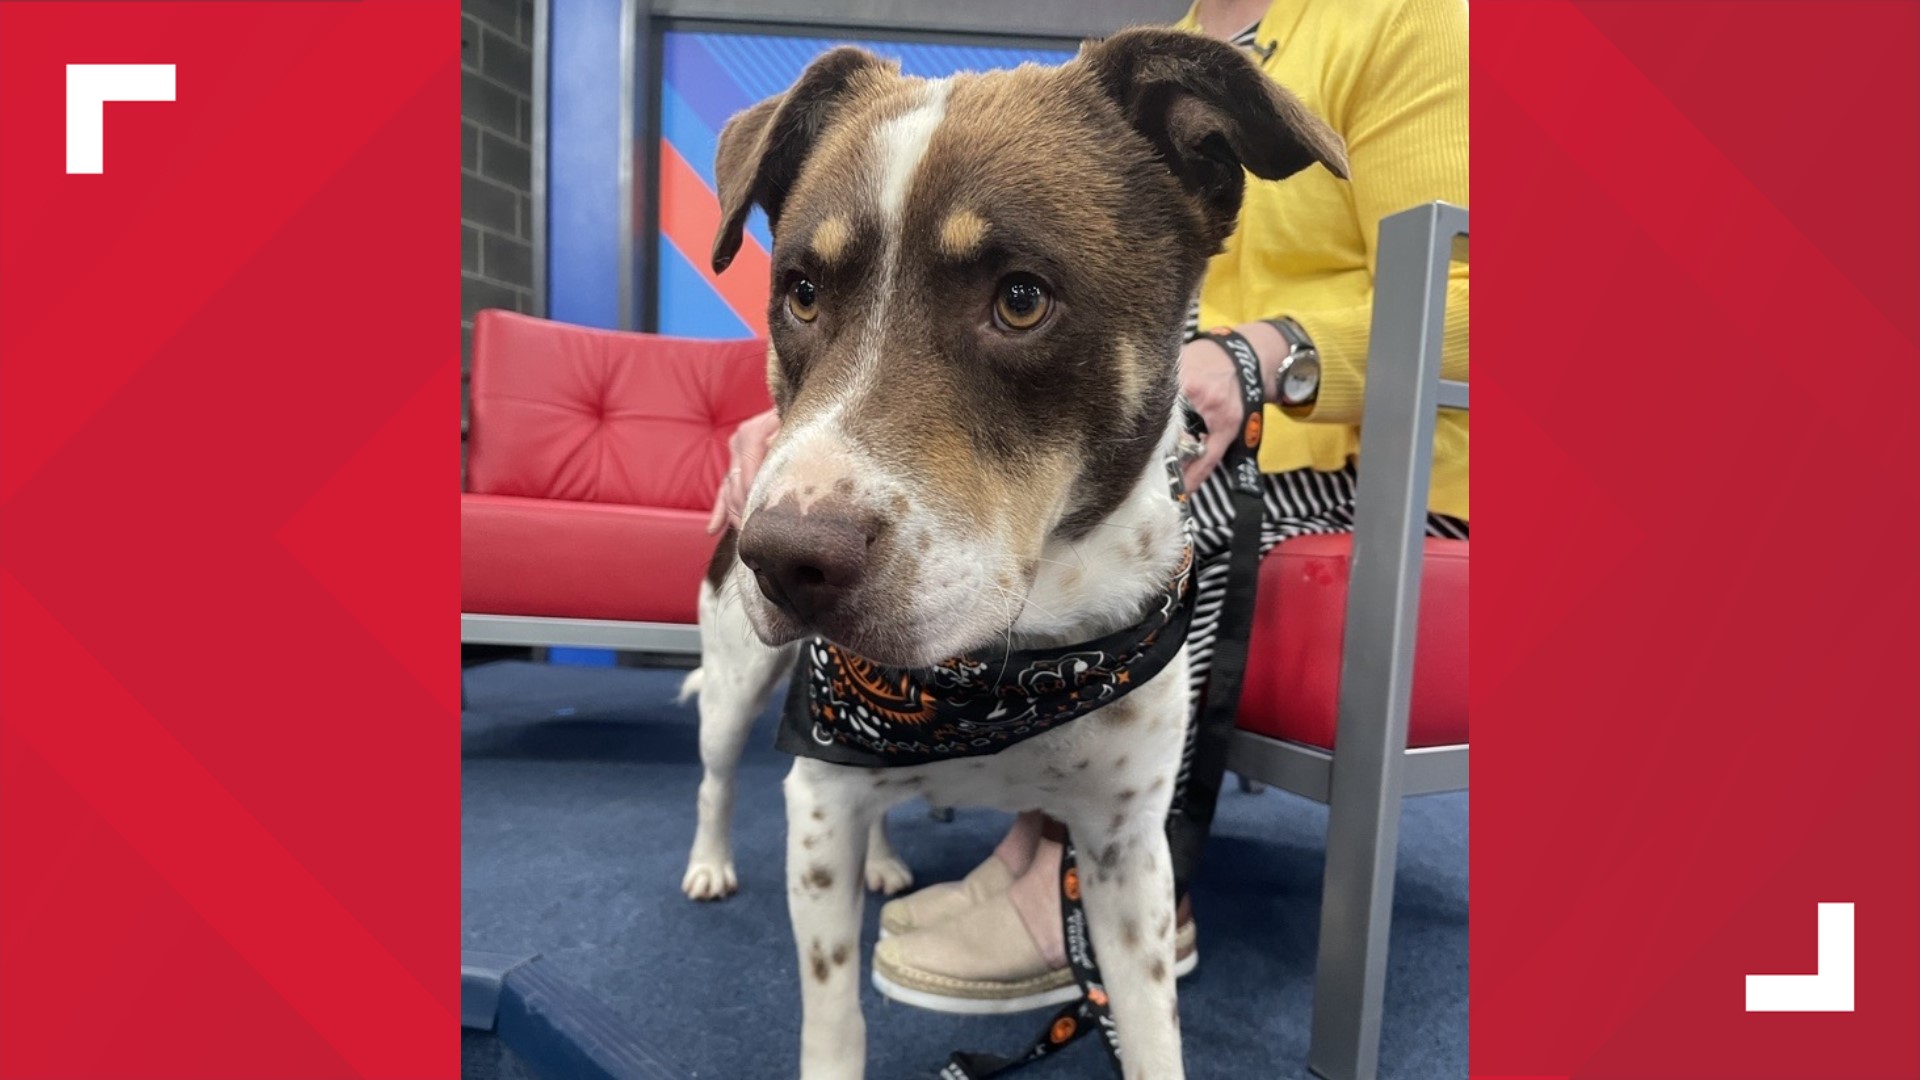 Pinto is a 4-year-old Australian Shepherd-Lab mix who gets along with kids and cats. He's available for adoption at the Quad City Animal Welfare Center.